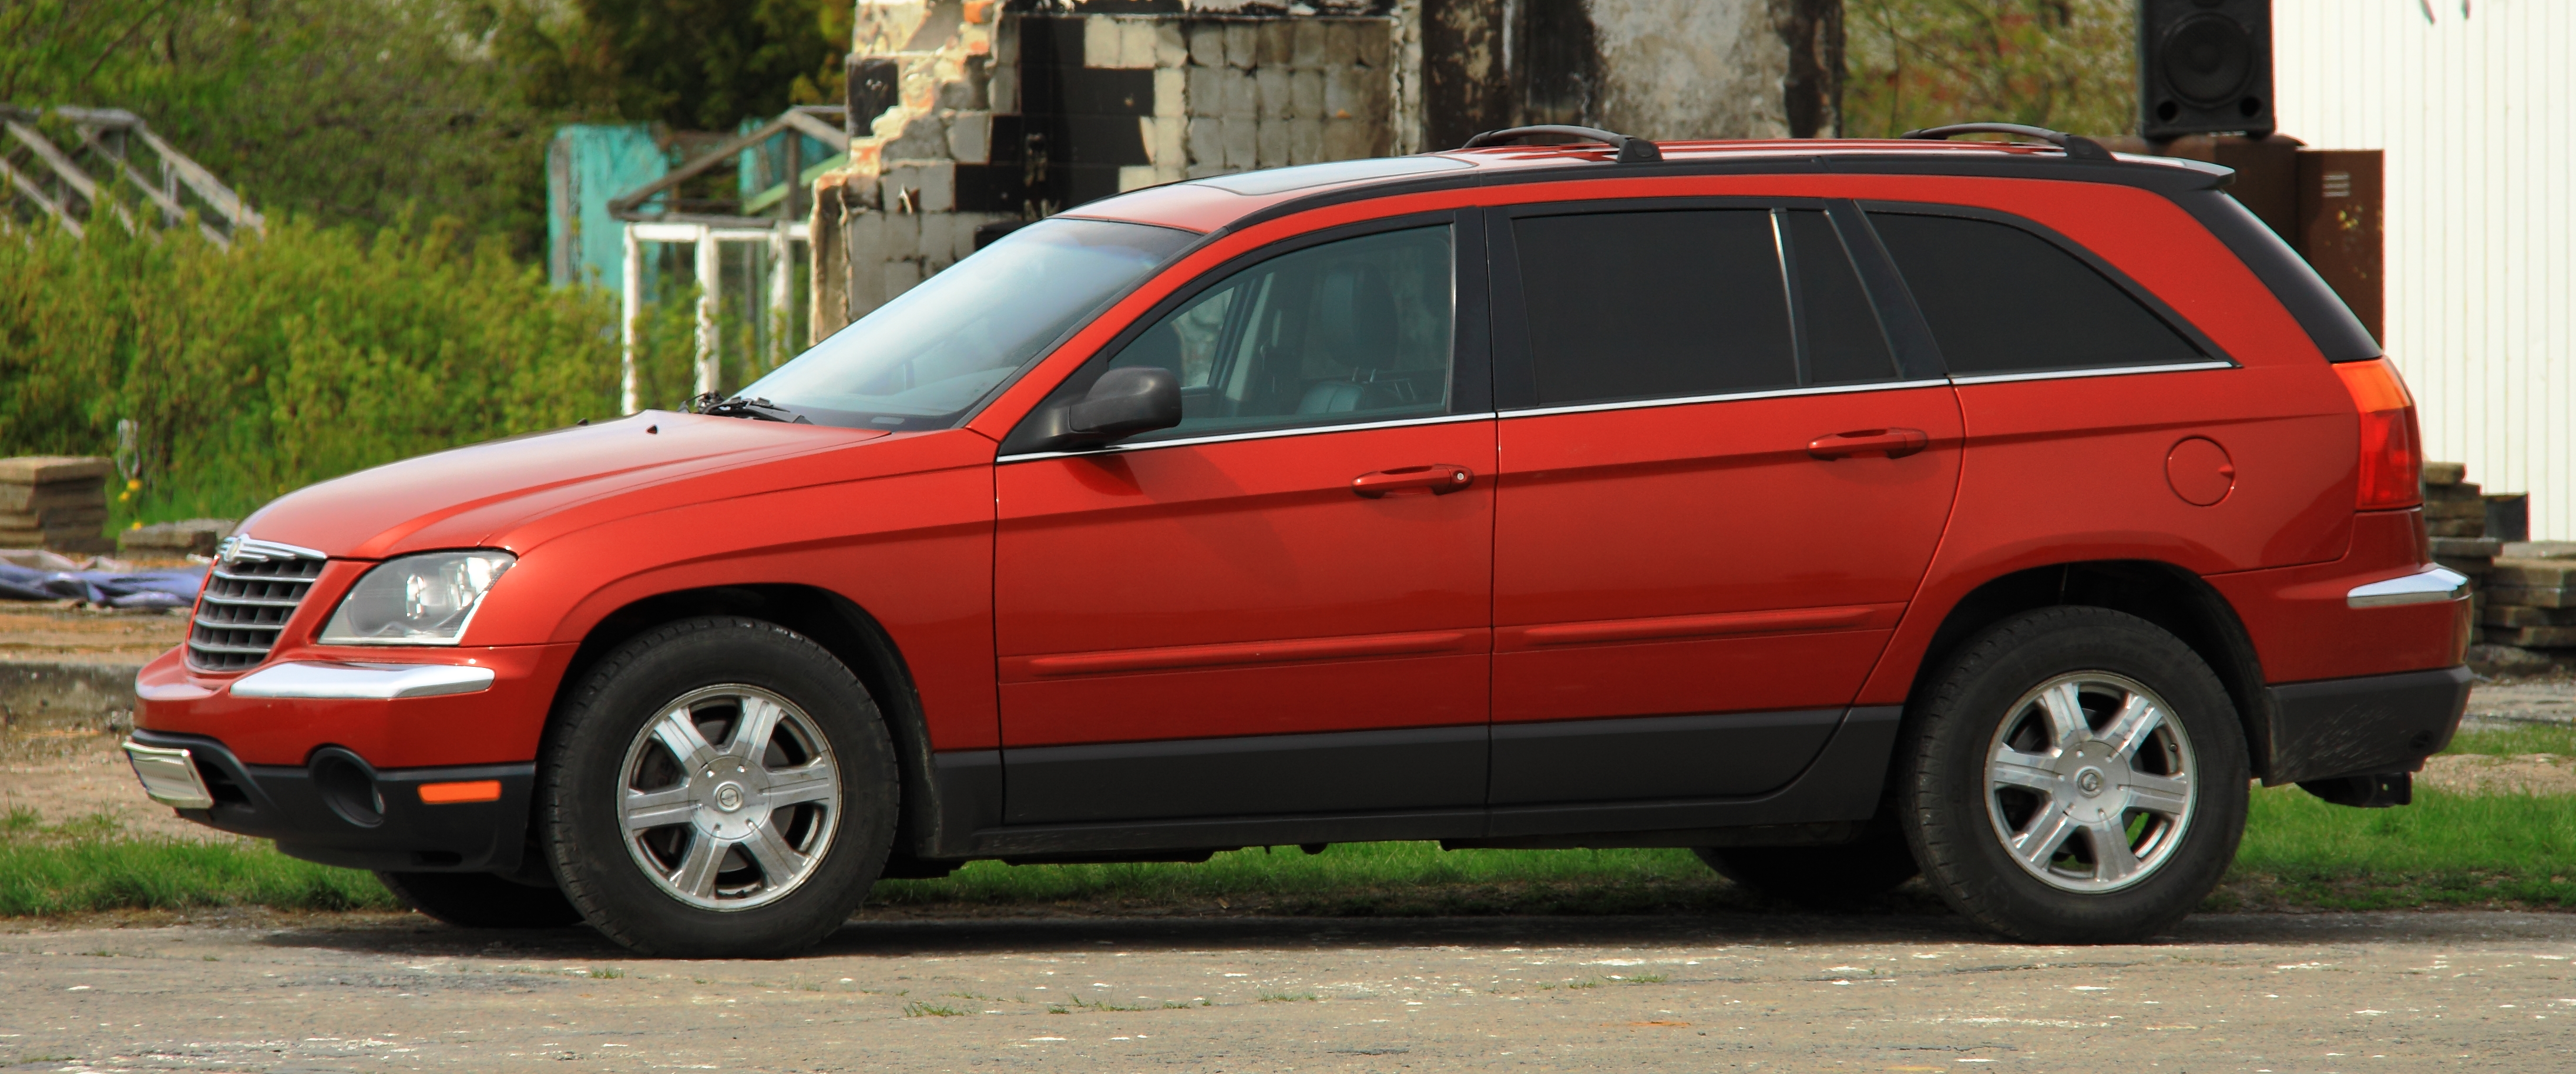 Chrysler Pacifica red